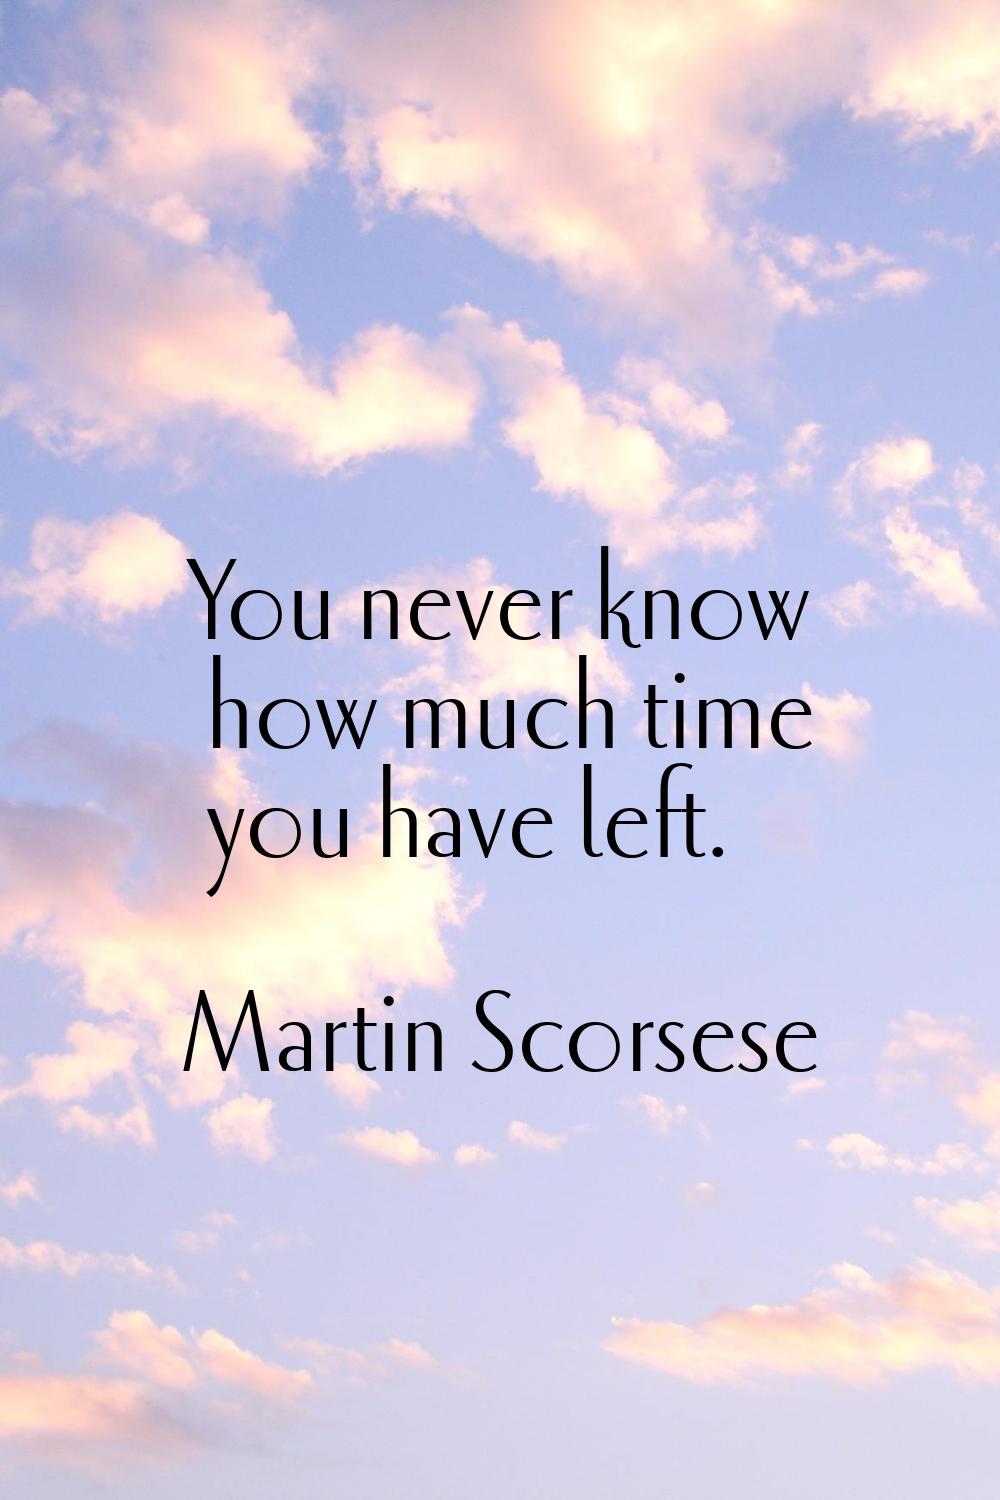 You never know how much time you have left.